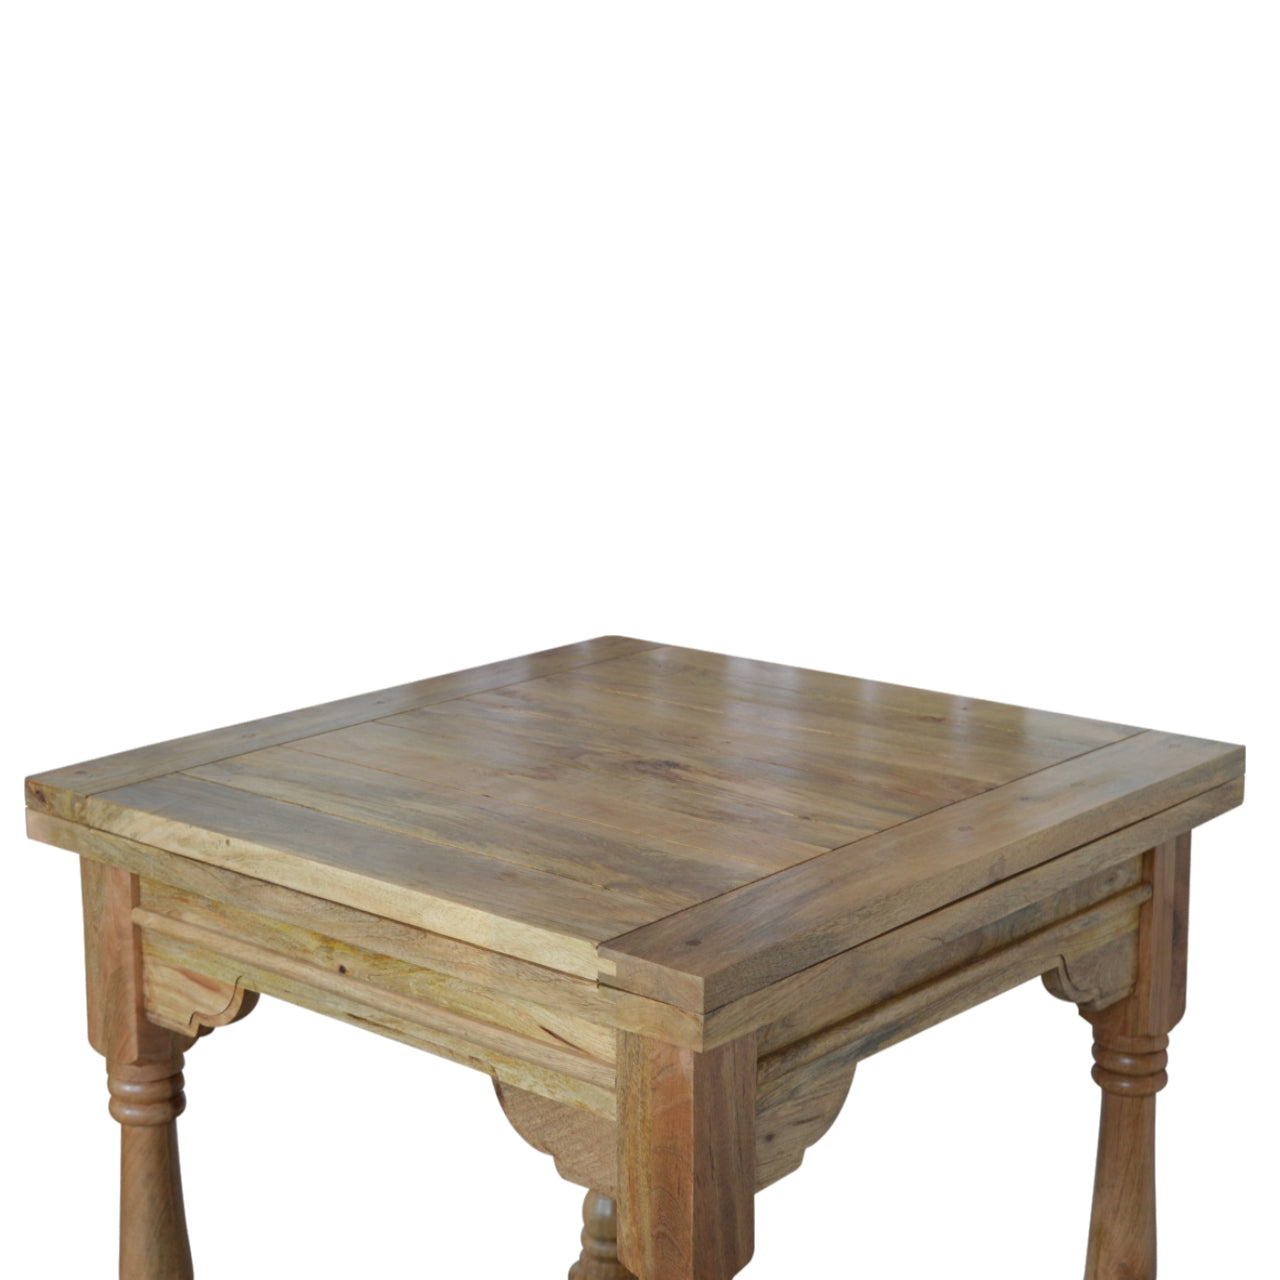 Turned Leg Butterfly Dining Table